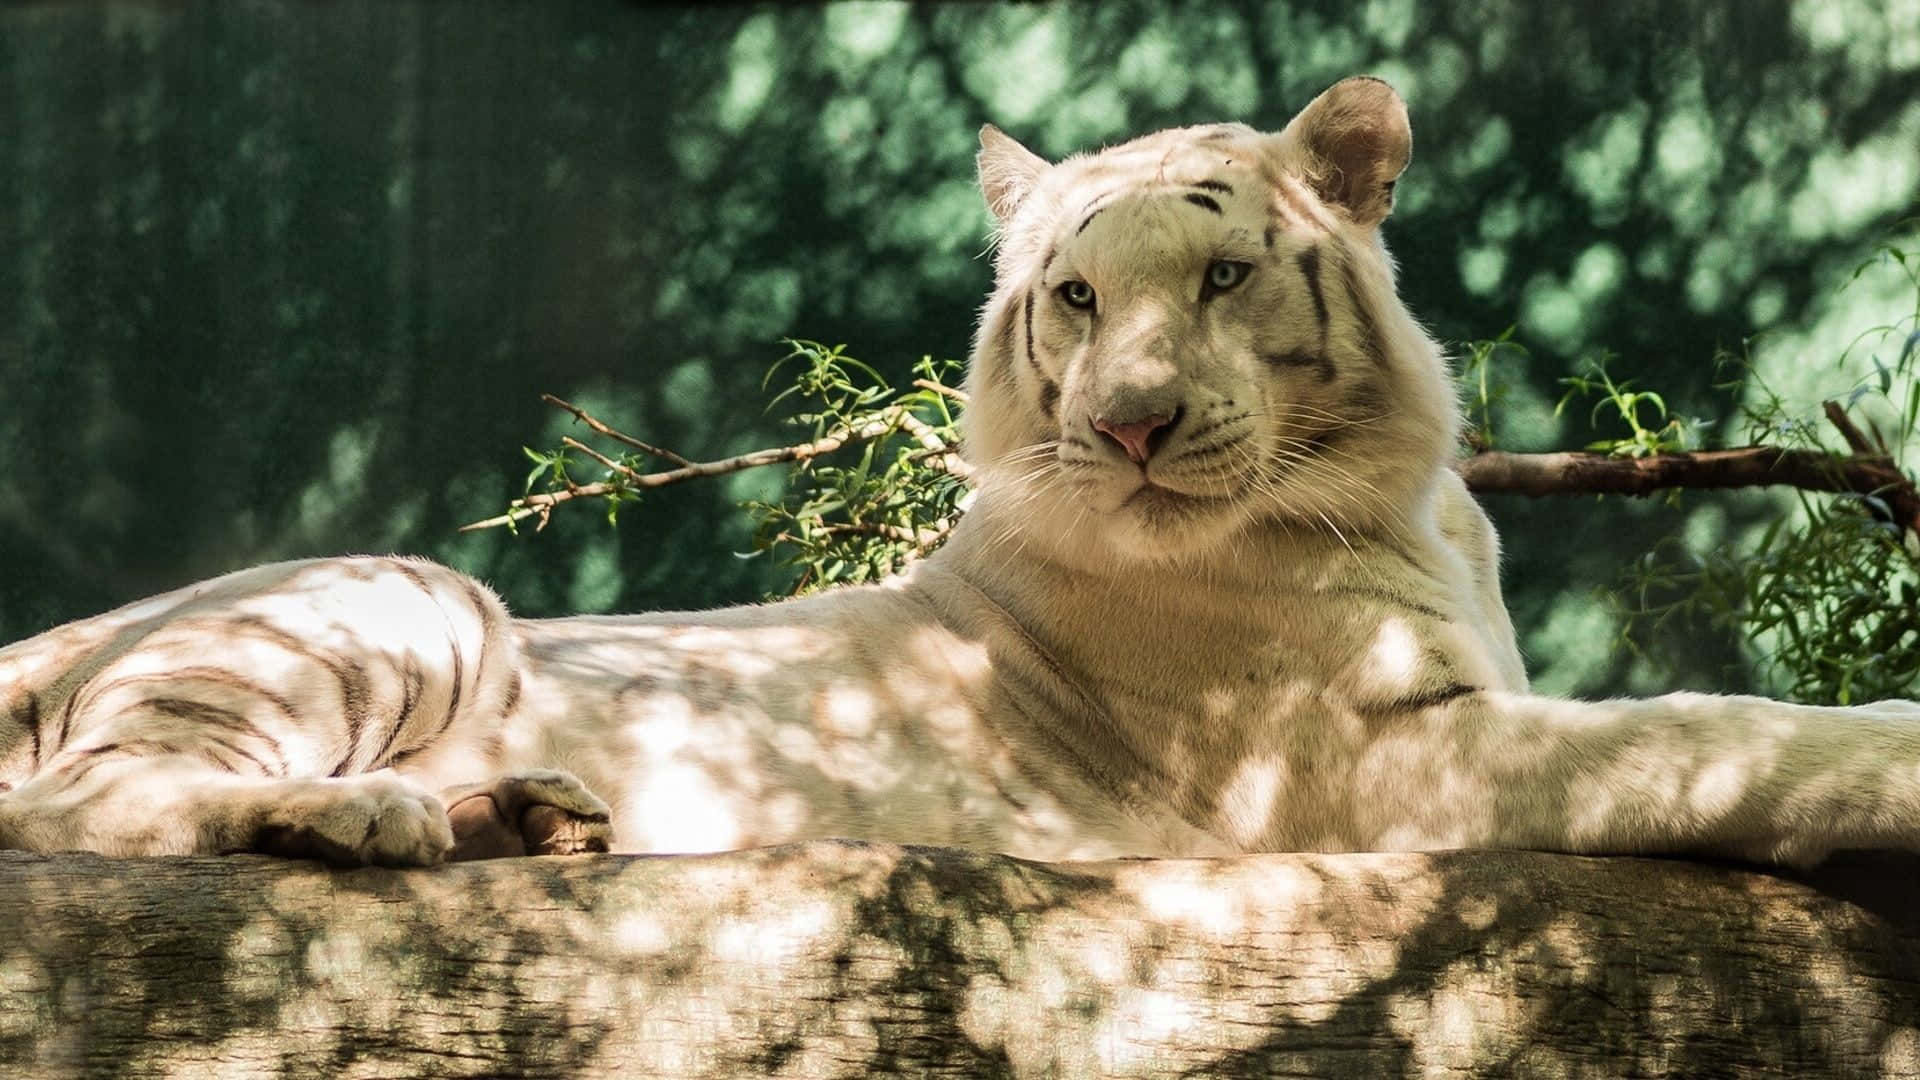 Staring at Its Surroundings - A White Tiger